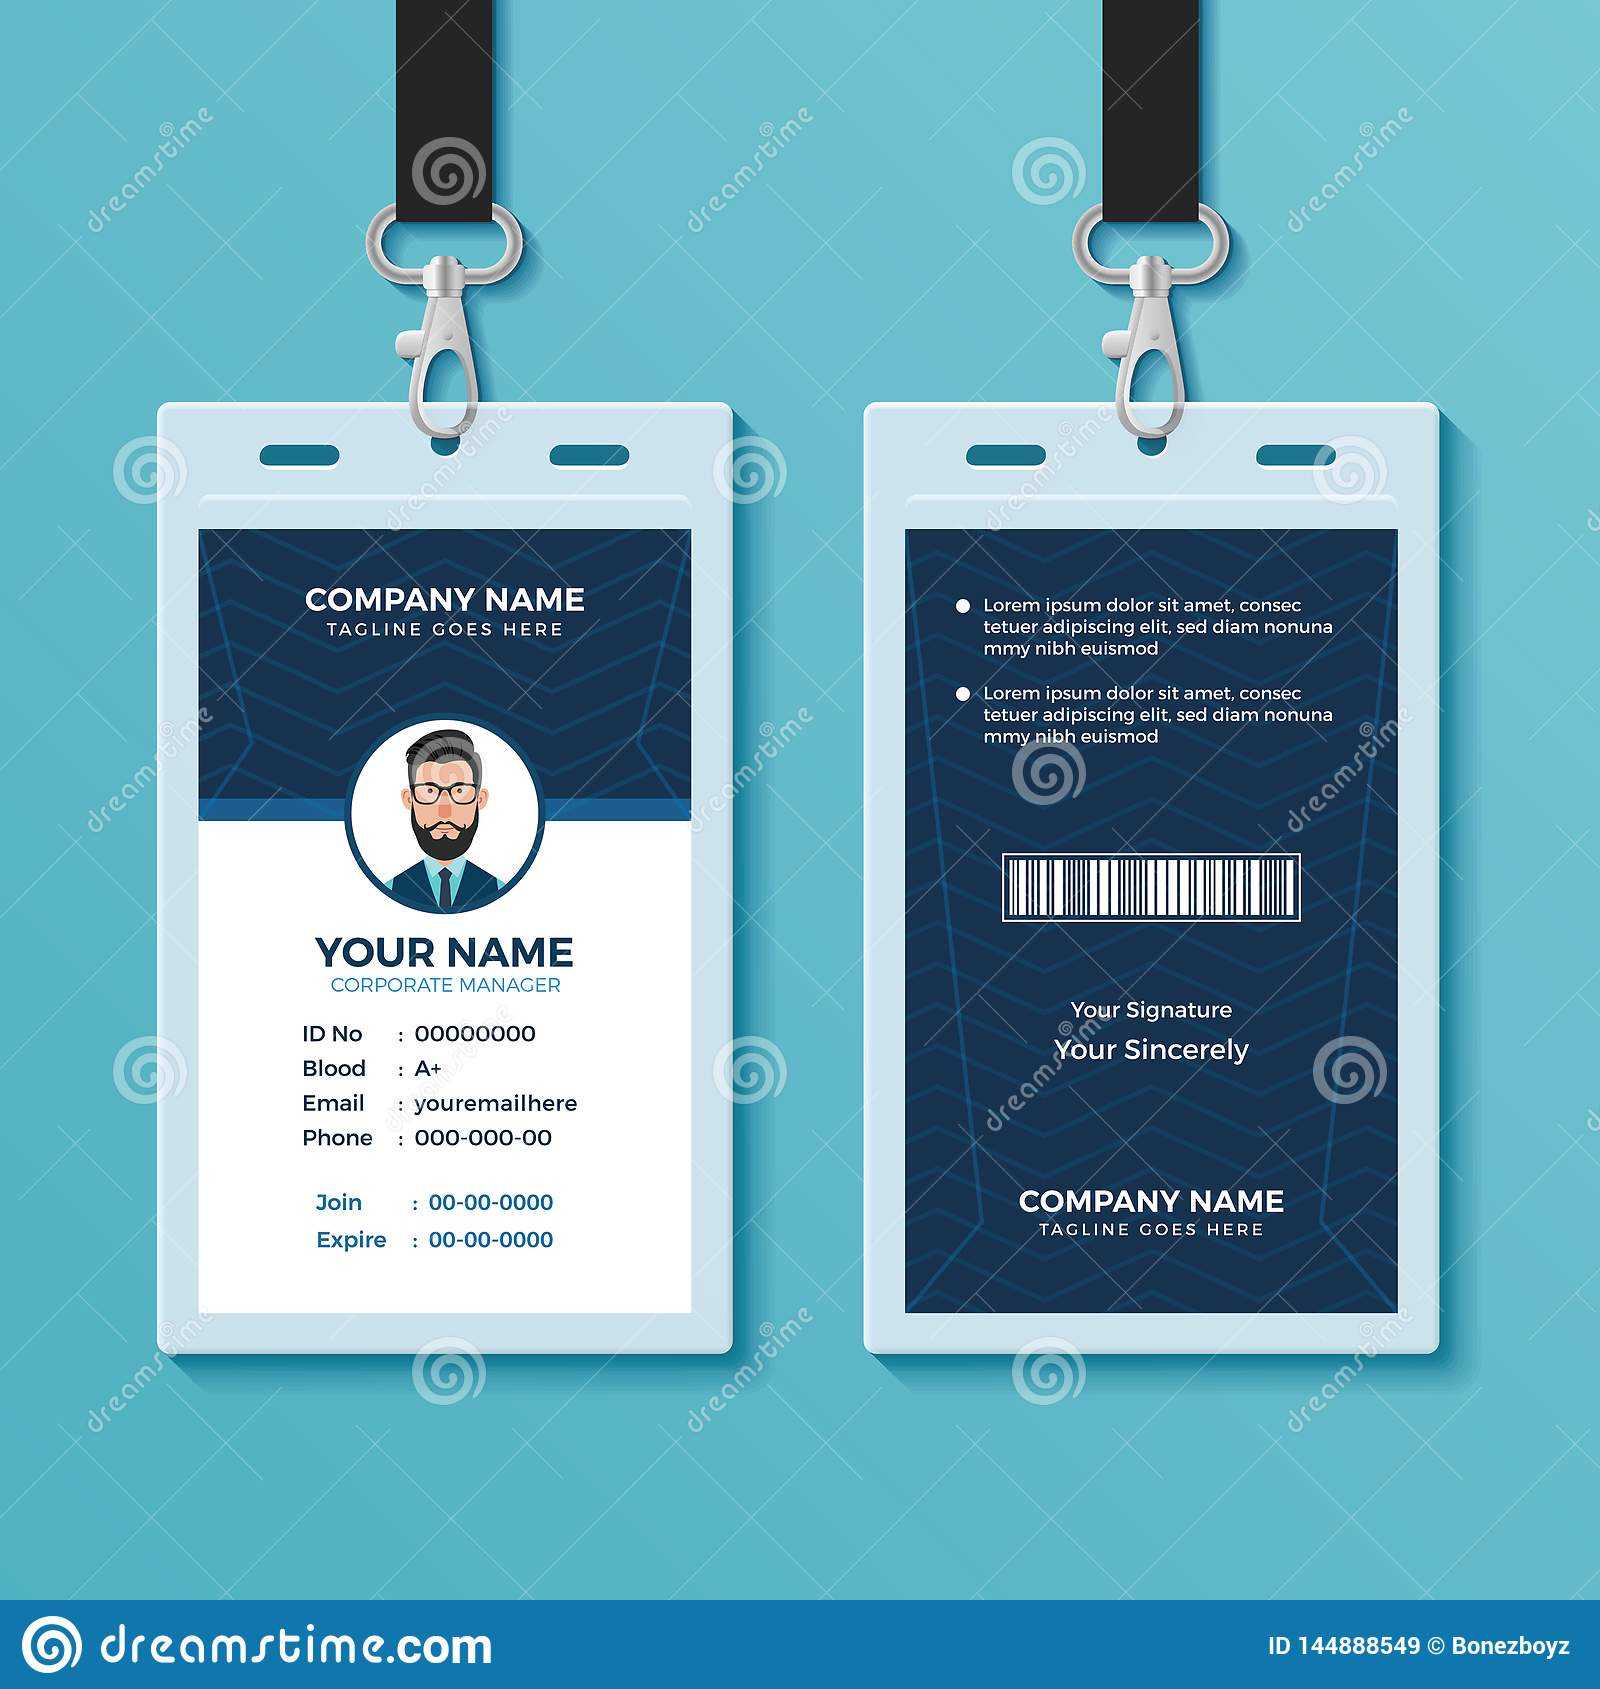 Modern And Clean Id Card Design Template Stock Vector Intended For Conference Id Card Template